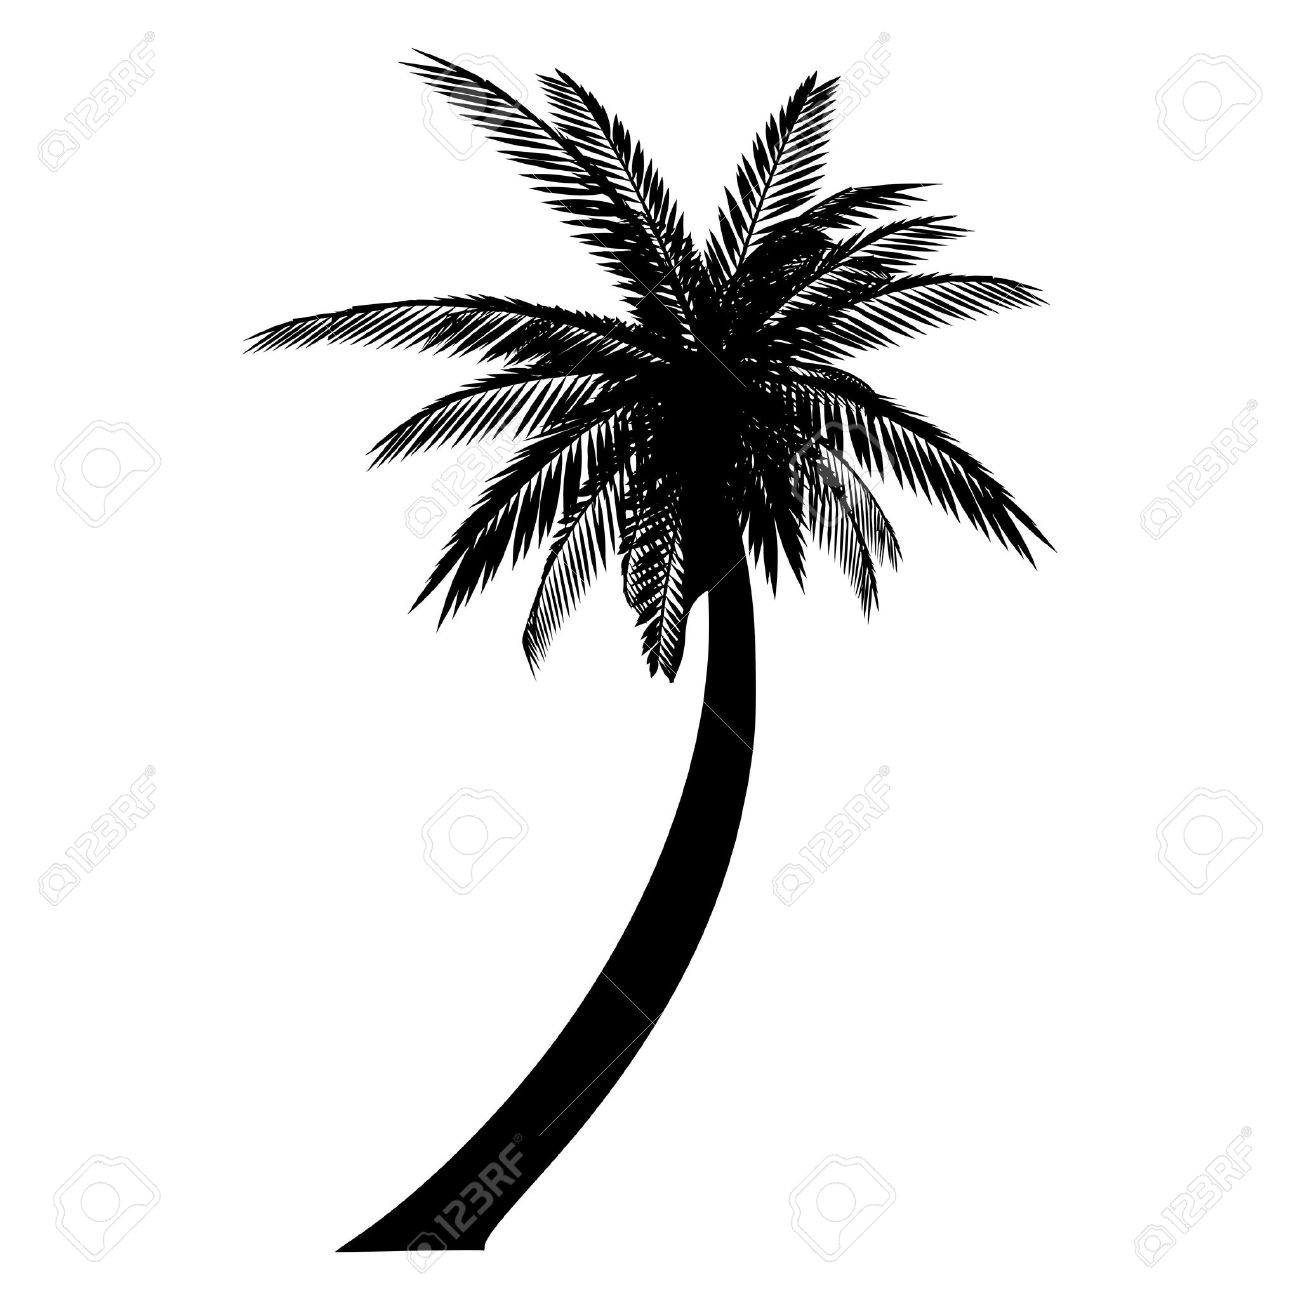 Palm Tree Silhouette | Free download on ClipArtMag